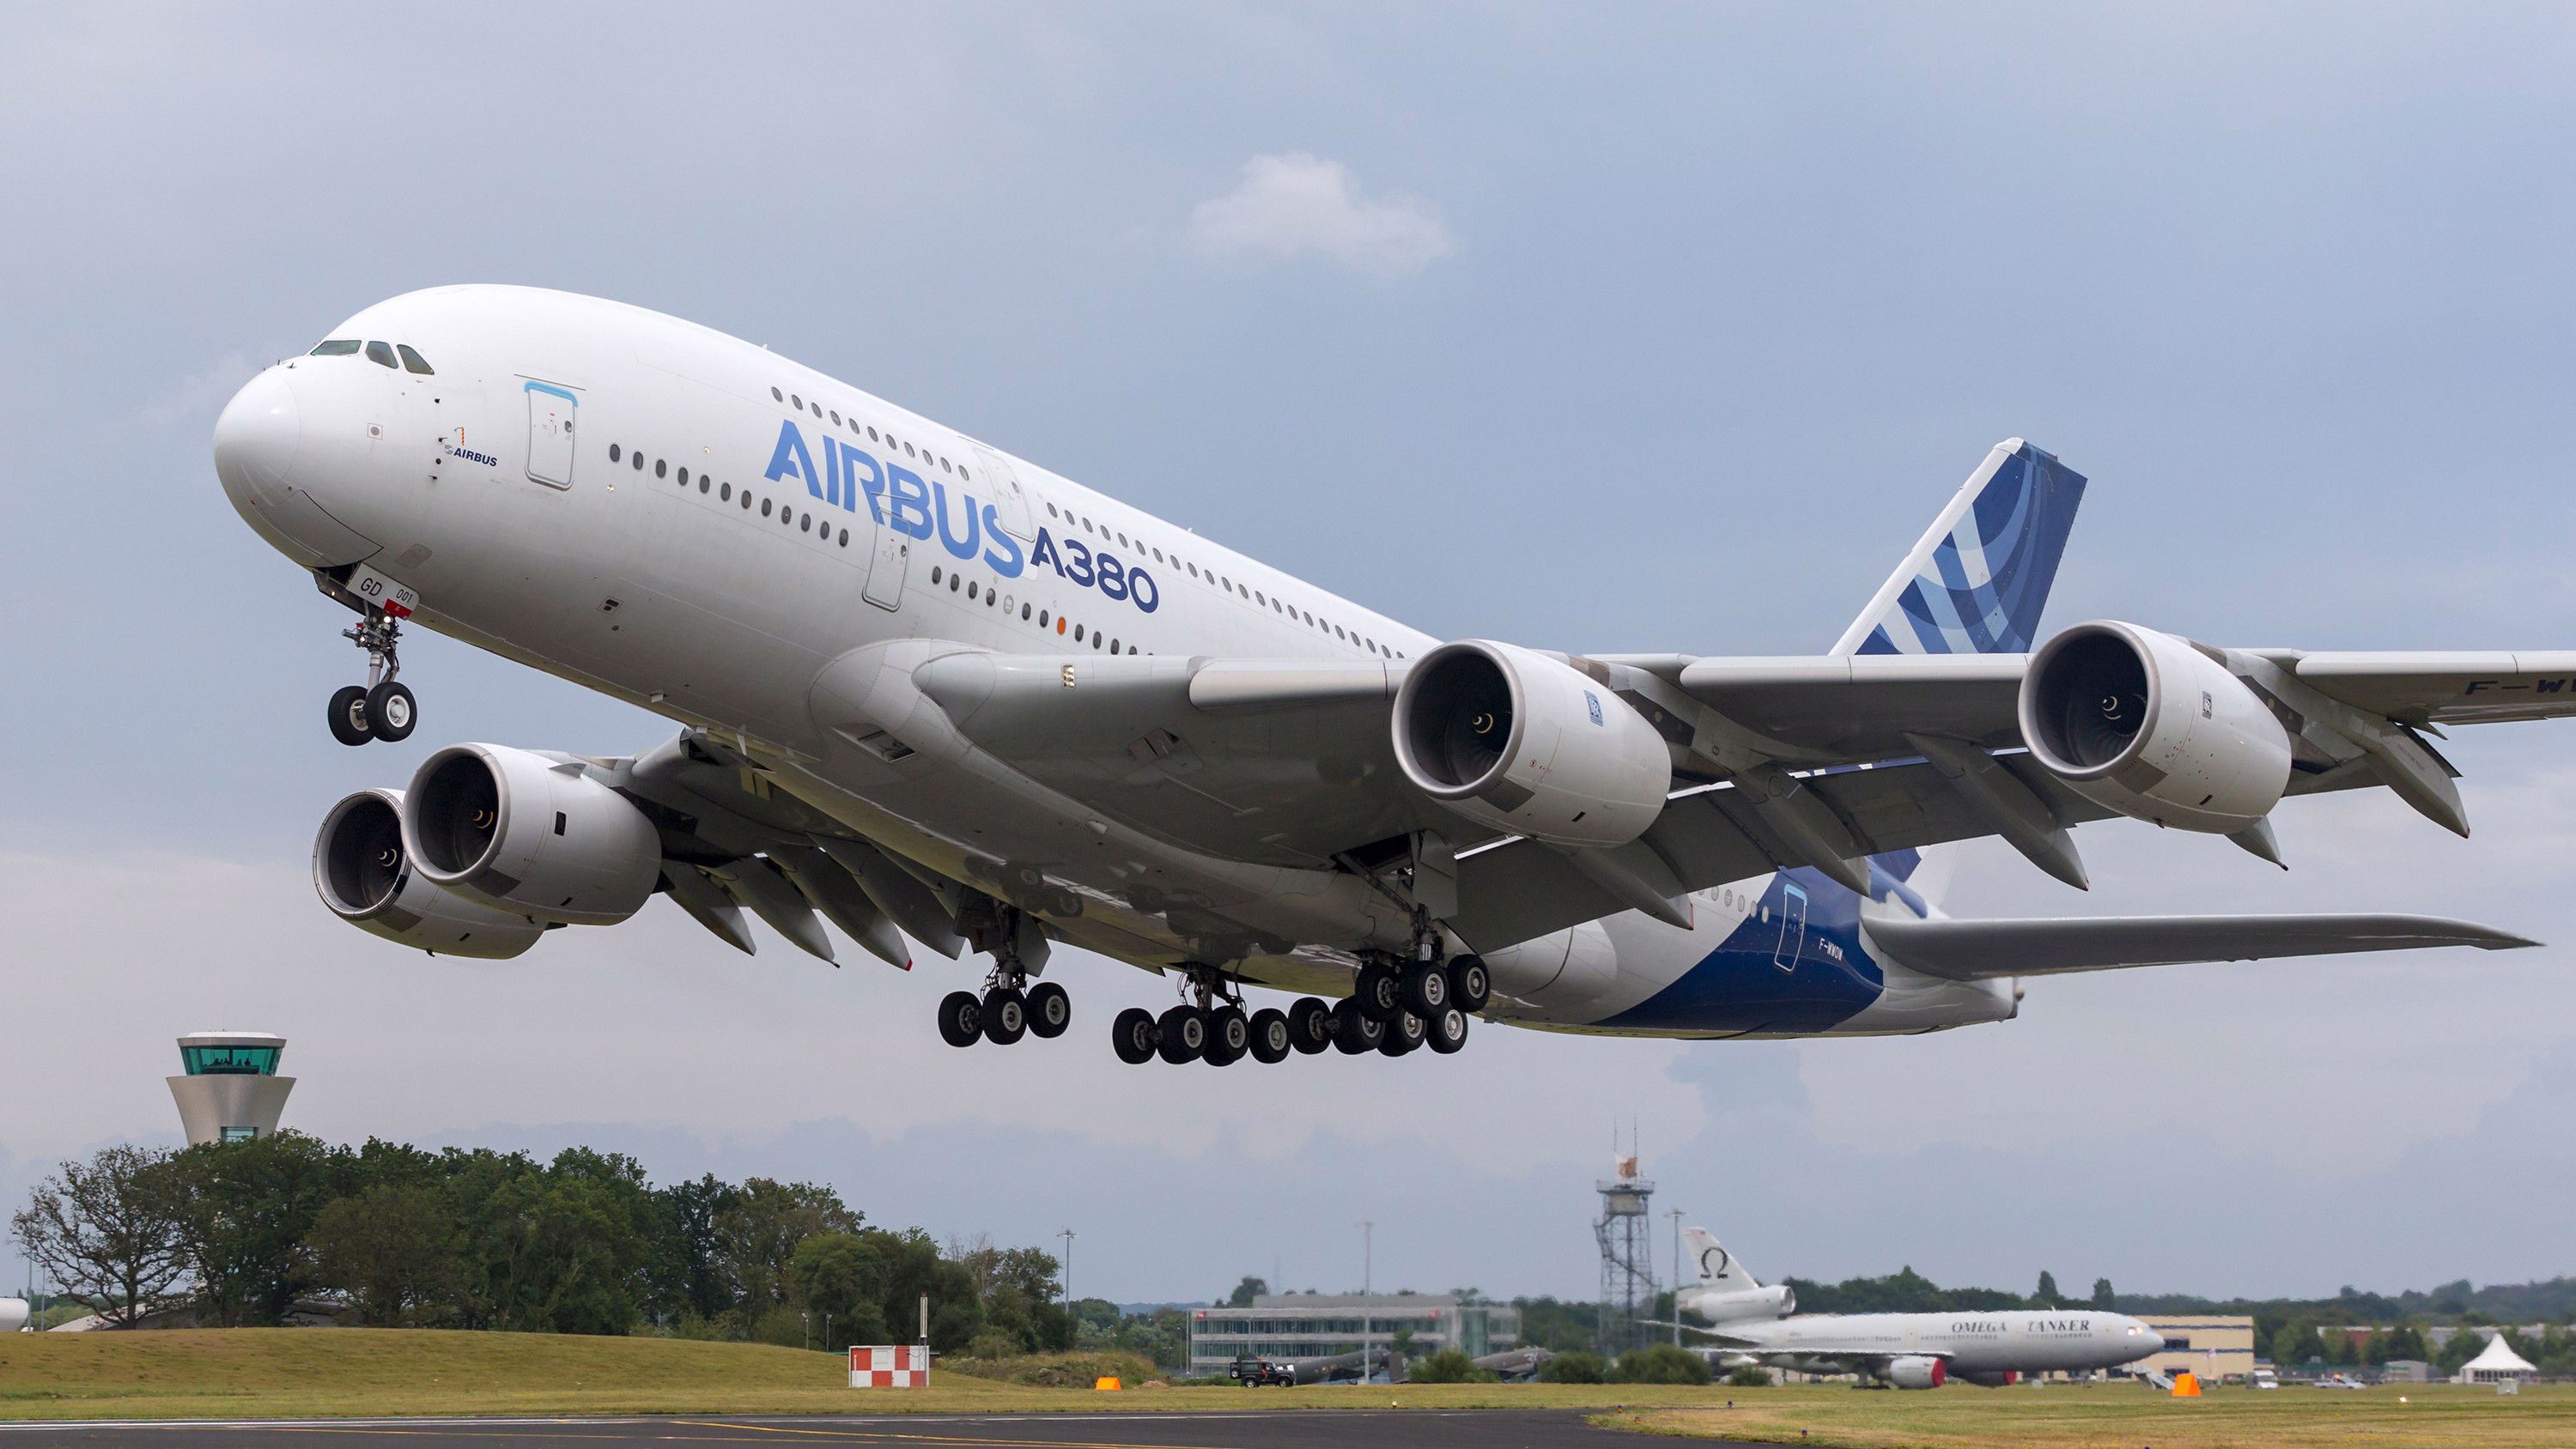 European Airbus workers call for a truly European recovery strategy and oppose forced redundancies